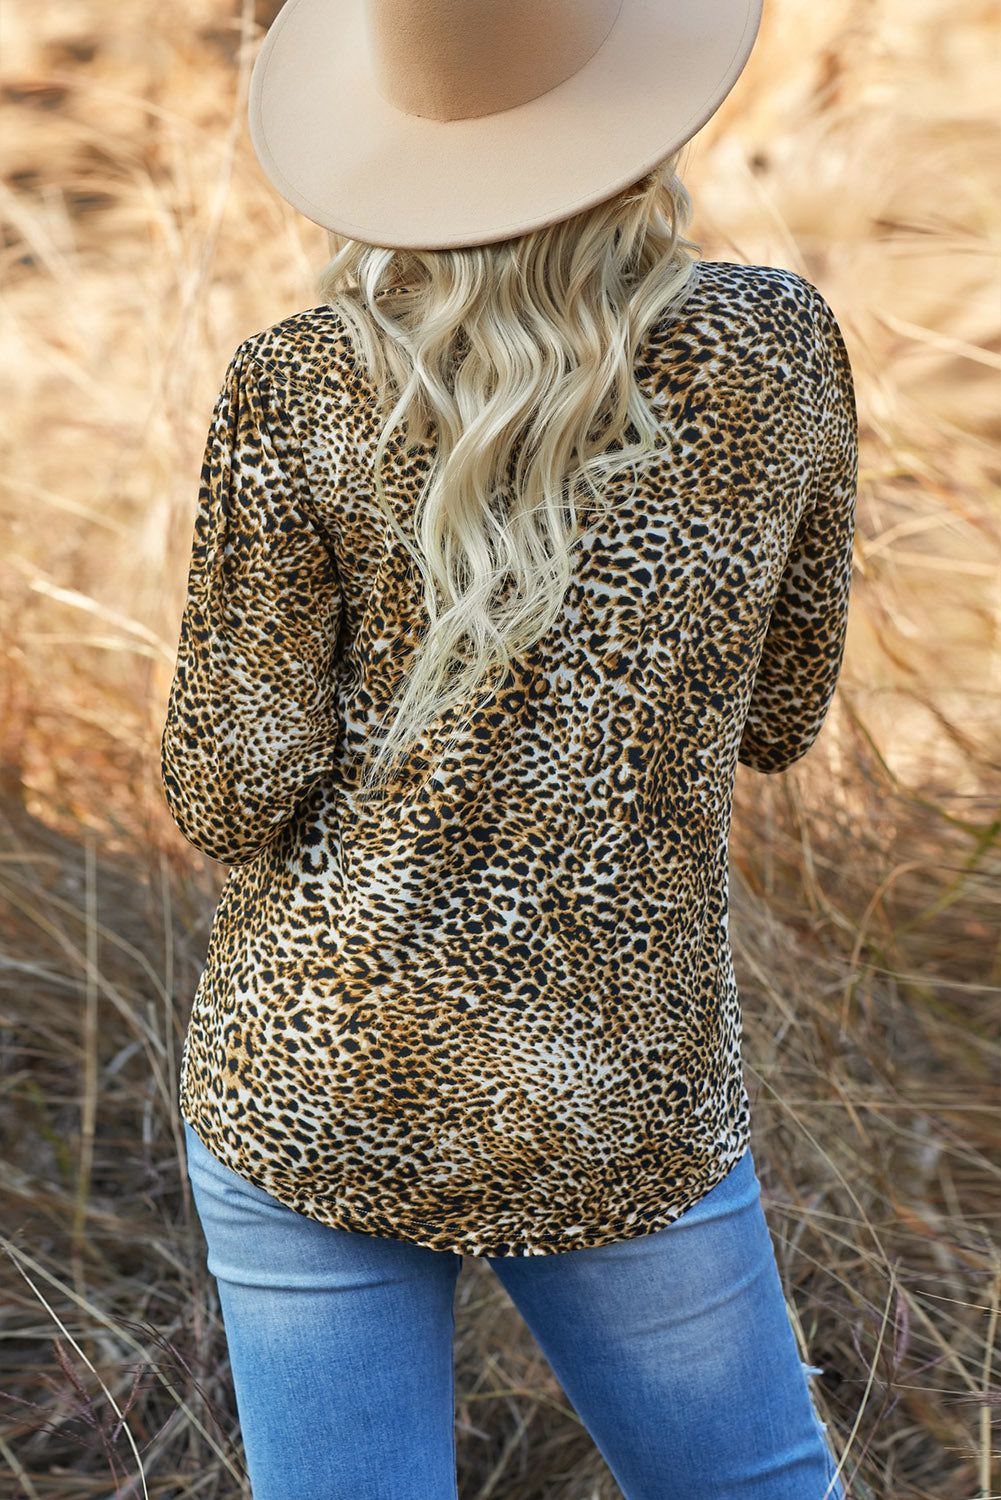 Leopard Print Sequin Pocket Long Sleeve Top - By Baano